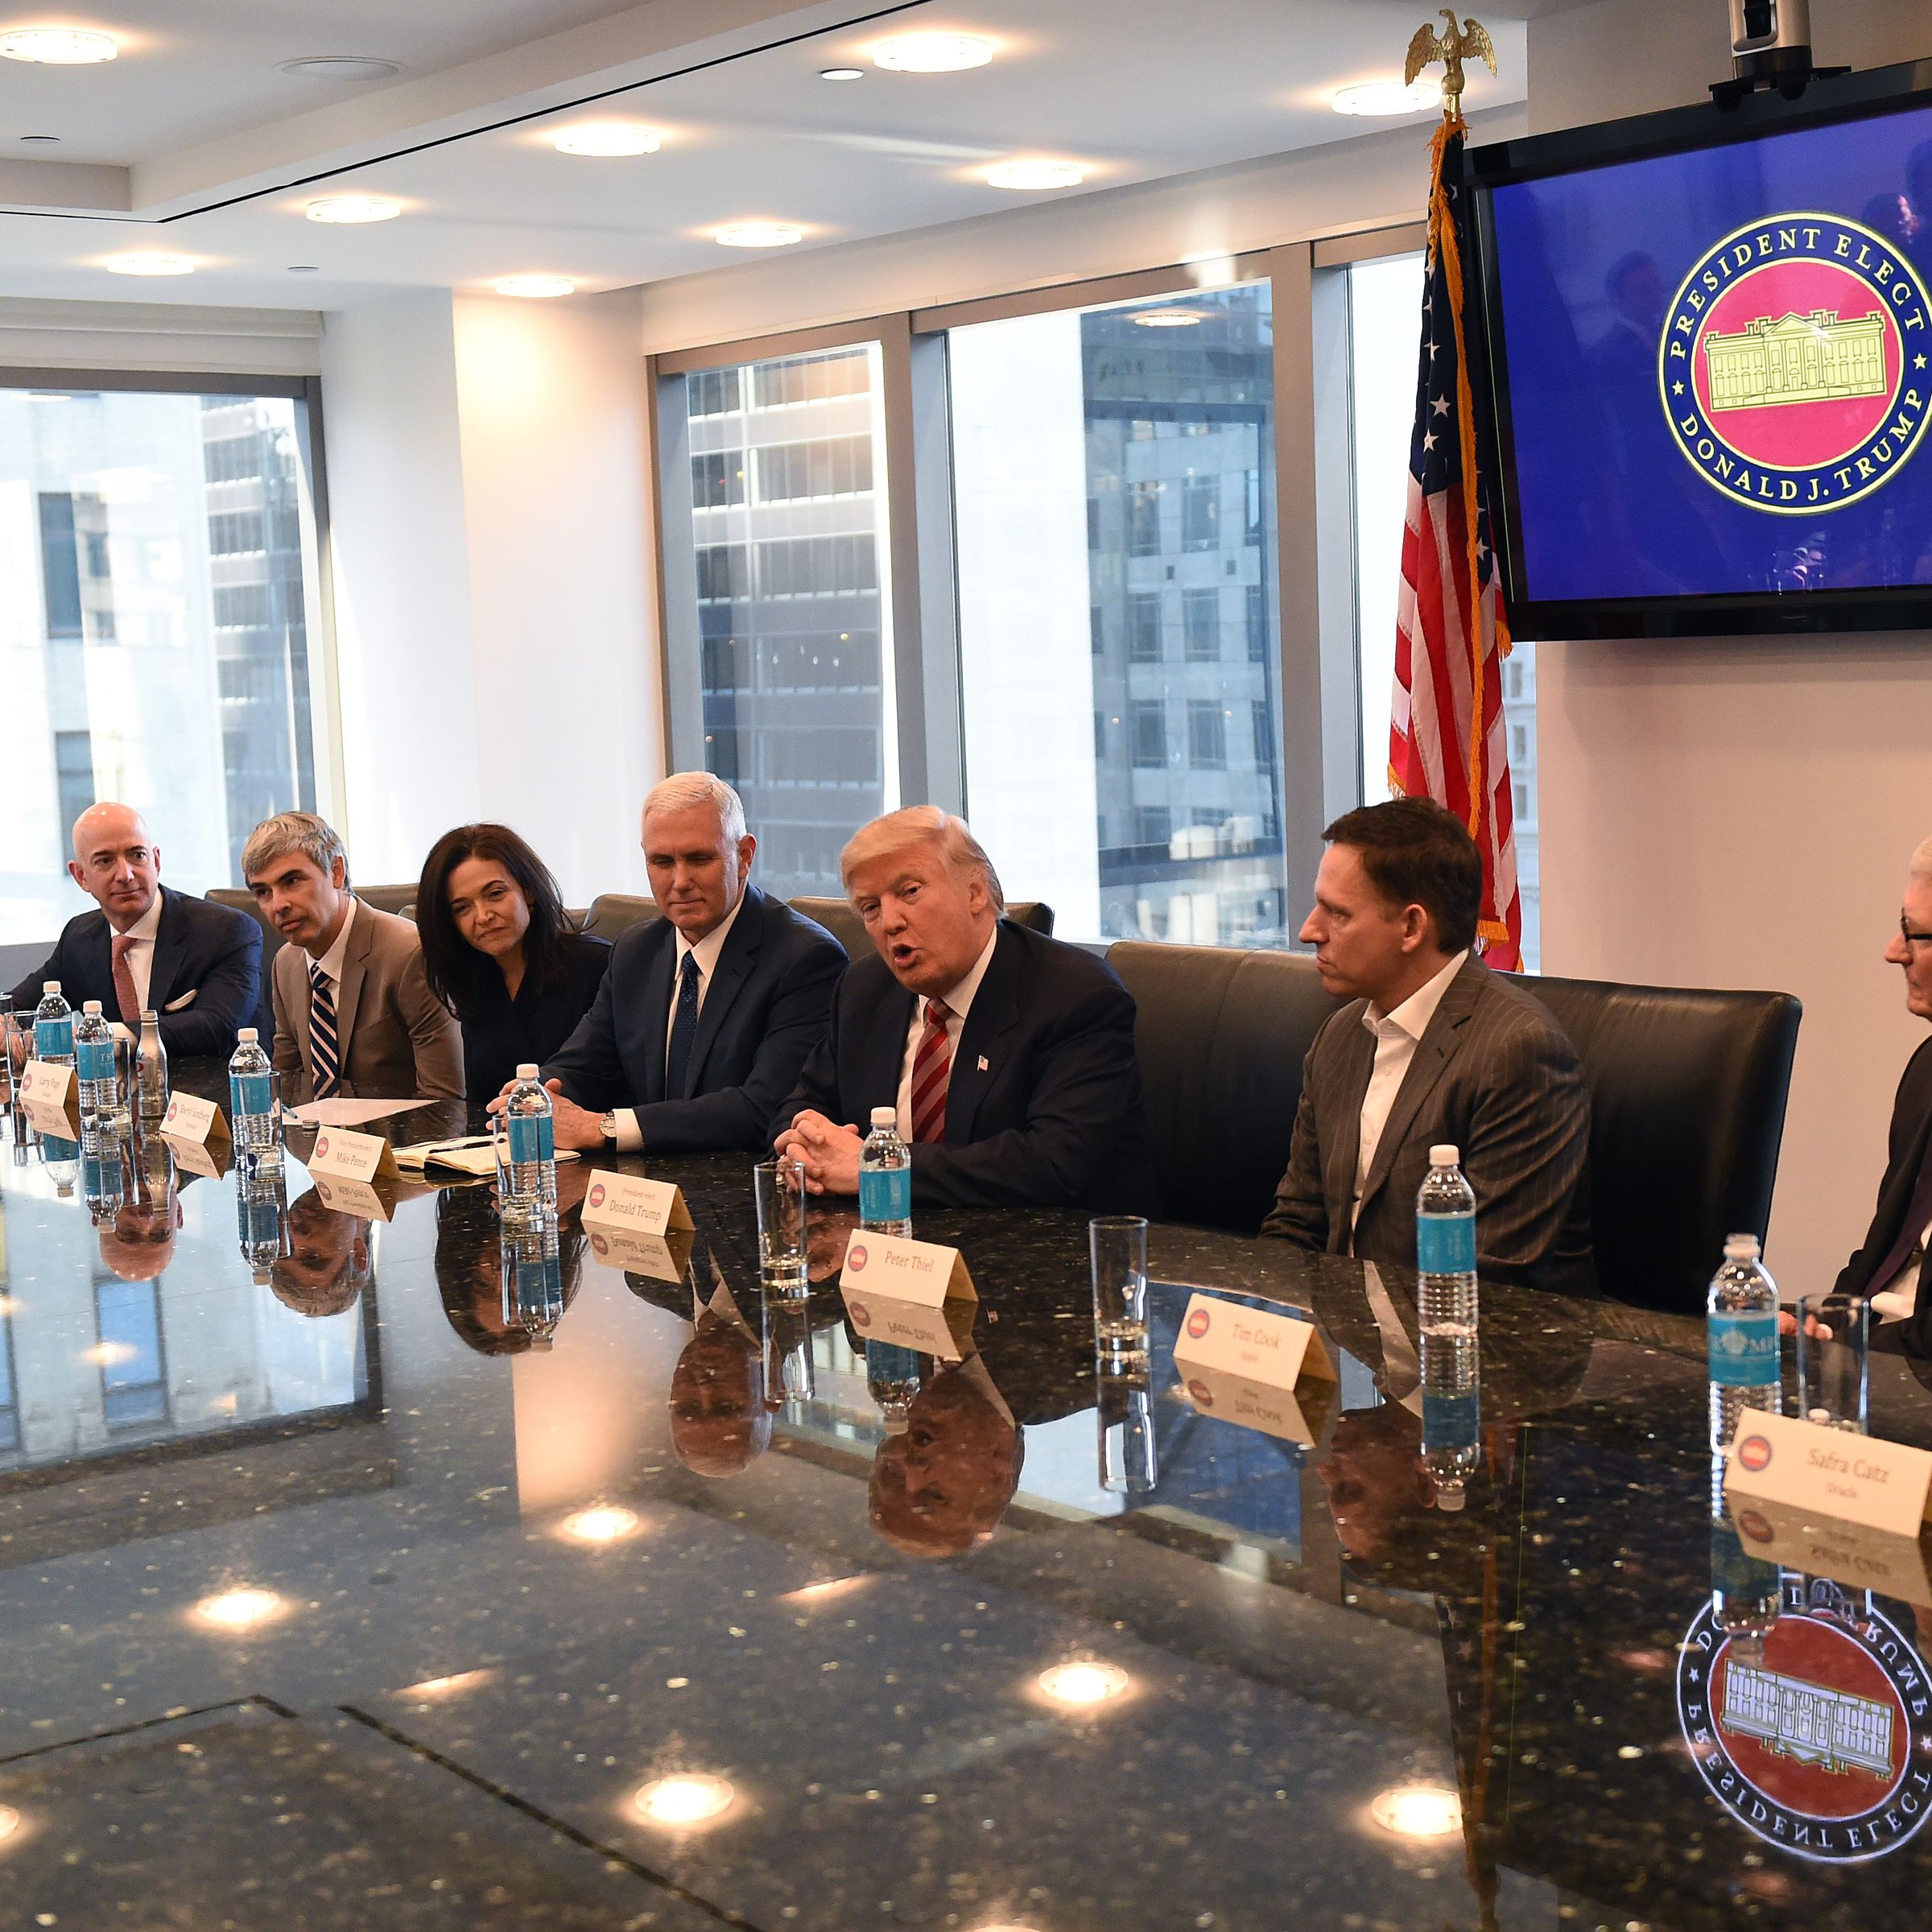 Amazon's chief Jeff Bezos, Larry Page of Alphabet, Facebook COO Sheryl Sandberg, Vice President elect Mike Pence, President-elect Donald Trump, Peter Thiel, co-founder and former CEO of PayPal, Tim Cook of Apple and Safra Catz of Oracle attend a meeting a